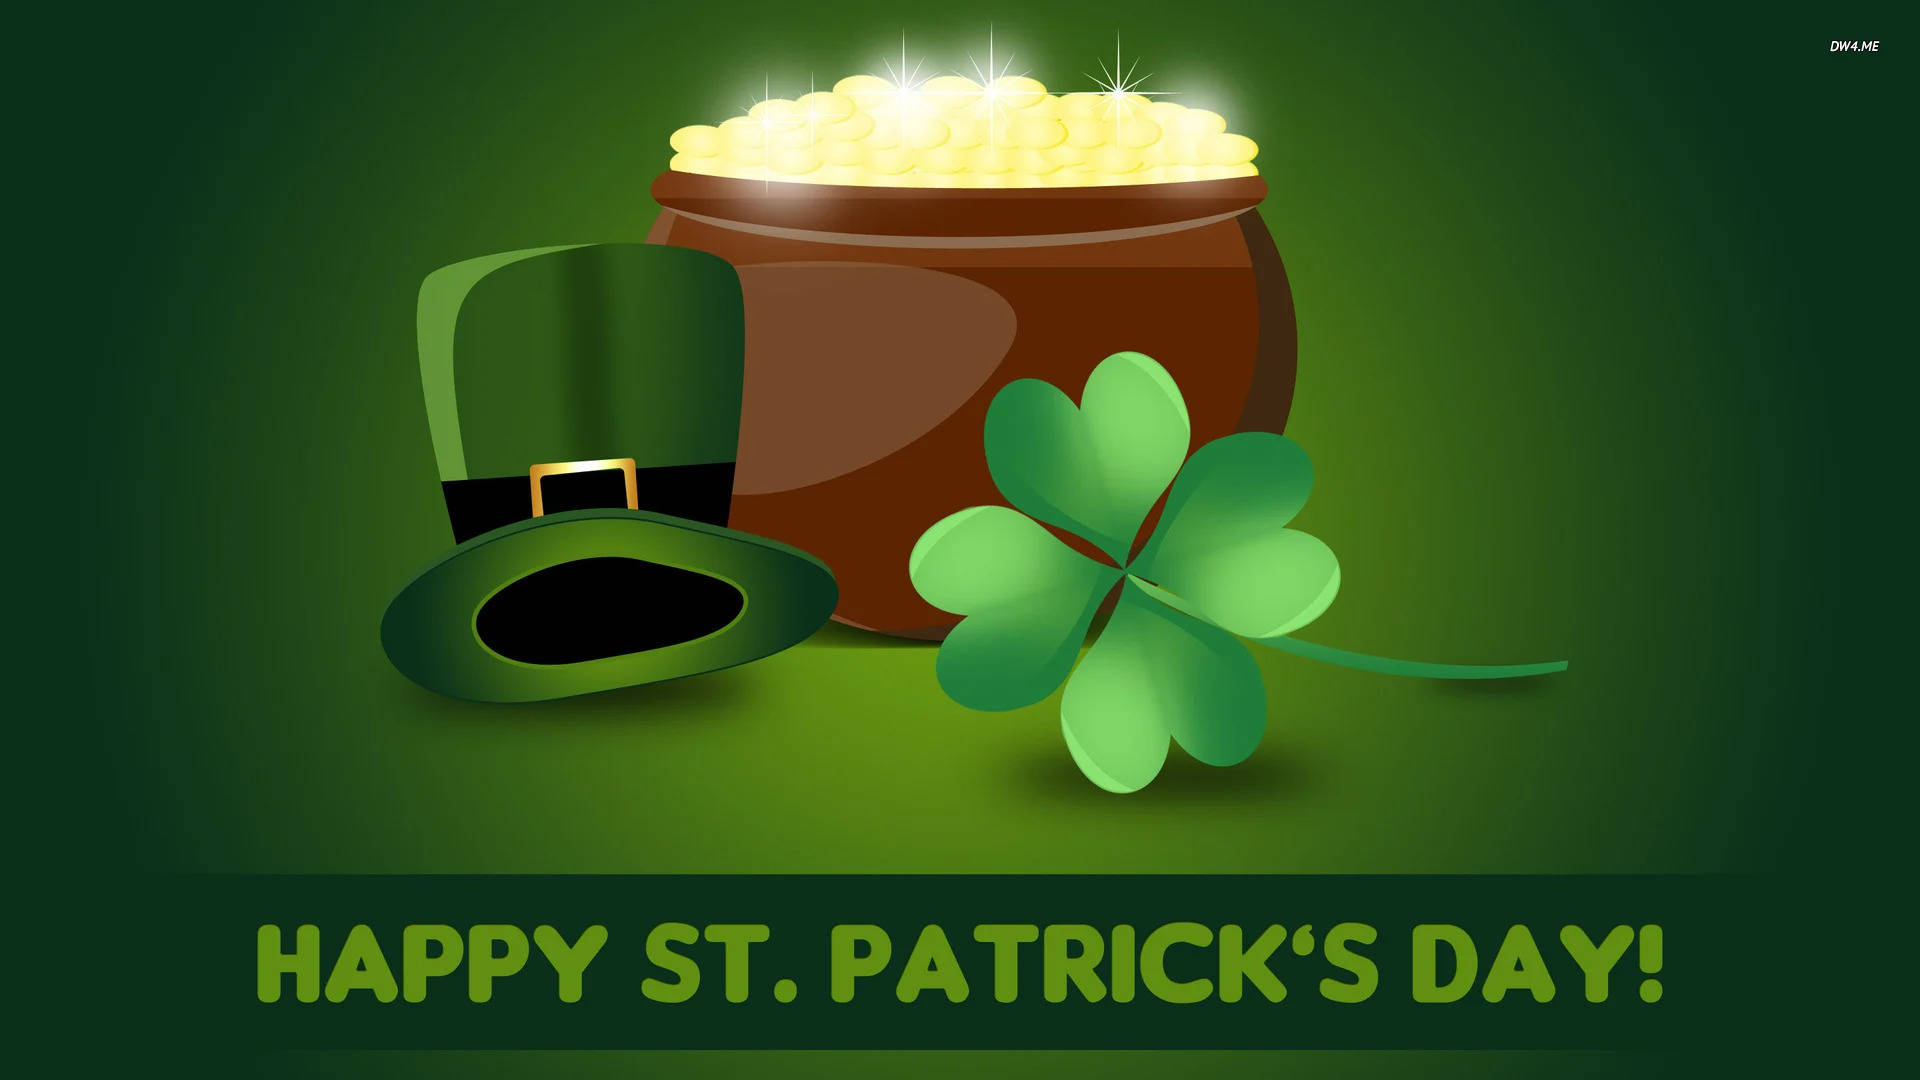 Saint Patrick’s Day With Pot Of Gold Background